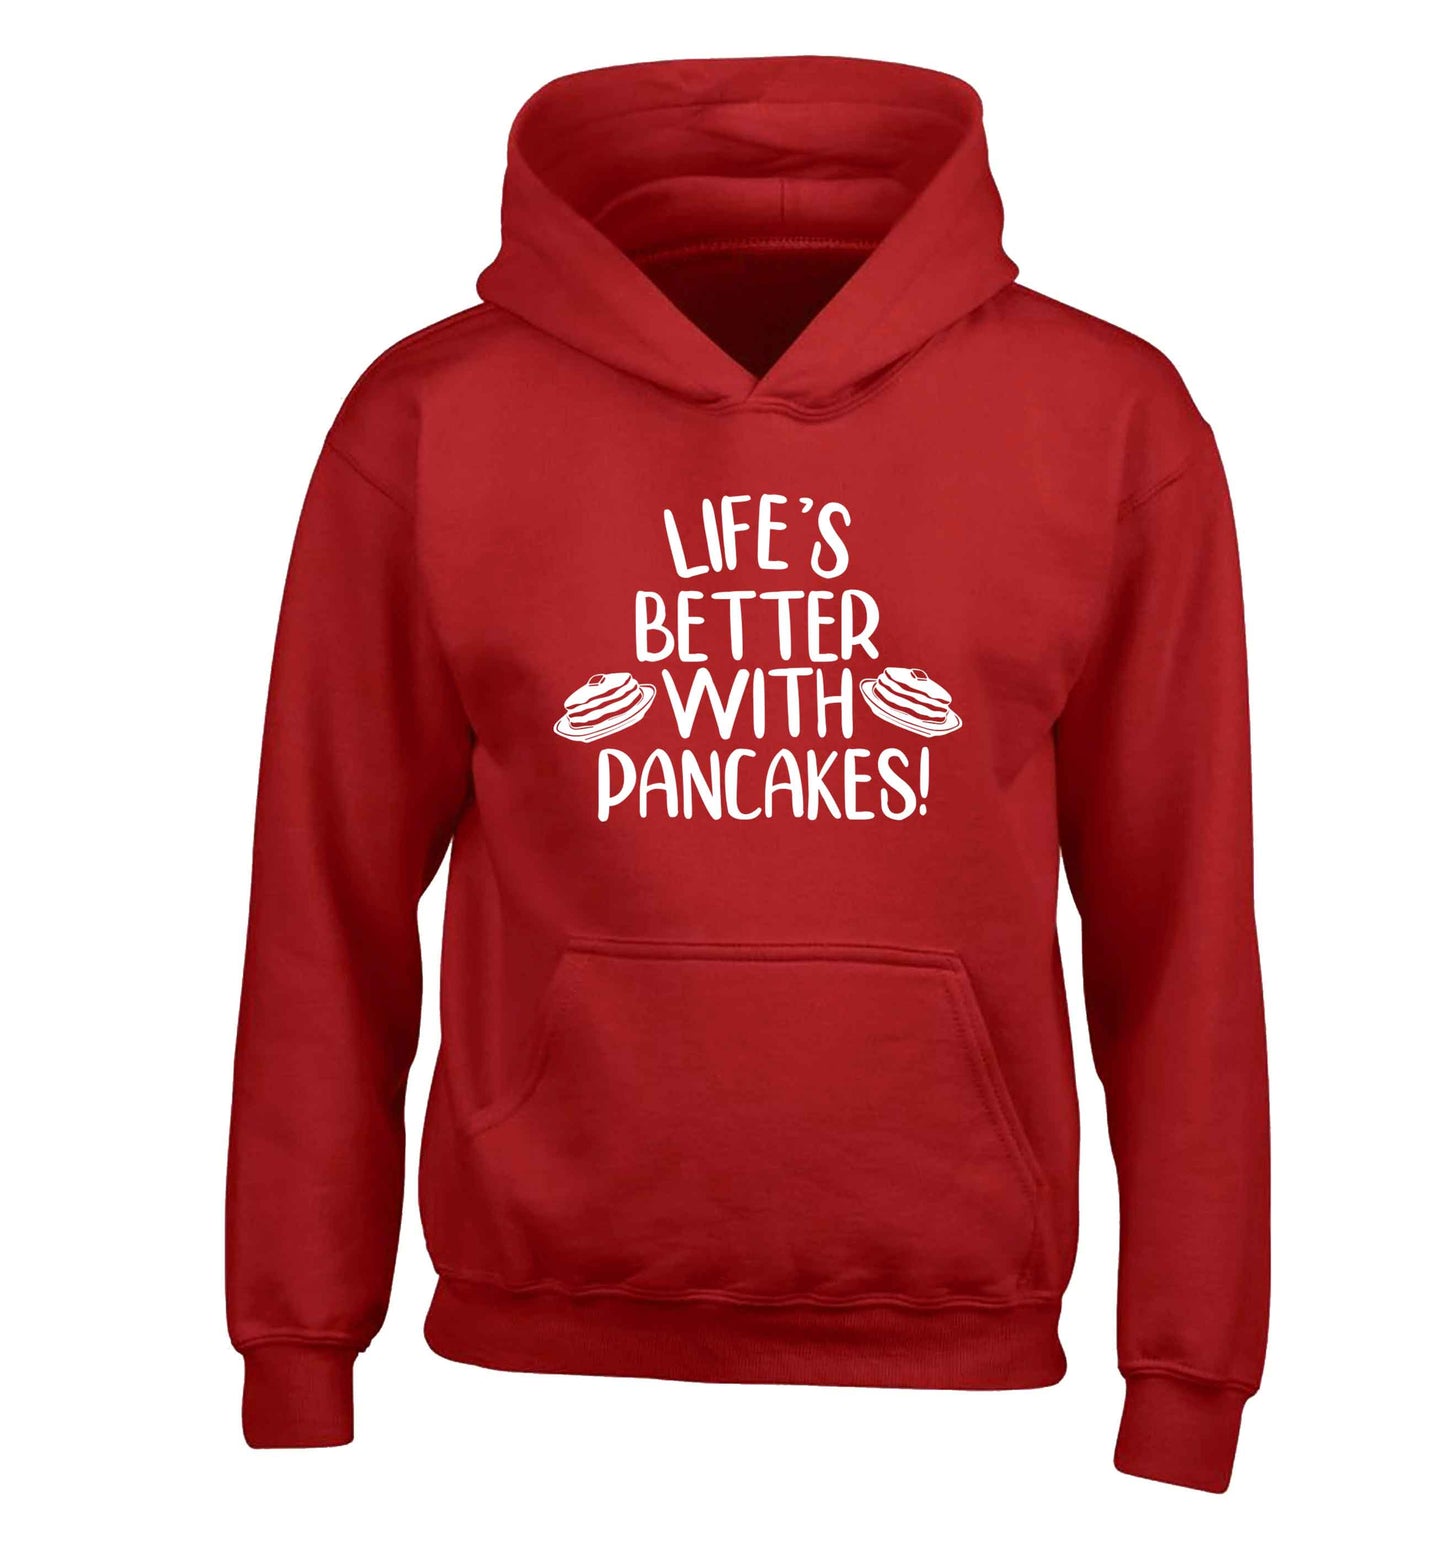 Life's better with pancakes children's red hoodie 12-13 Years